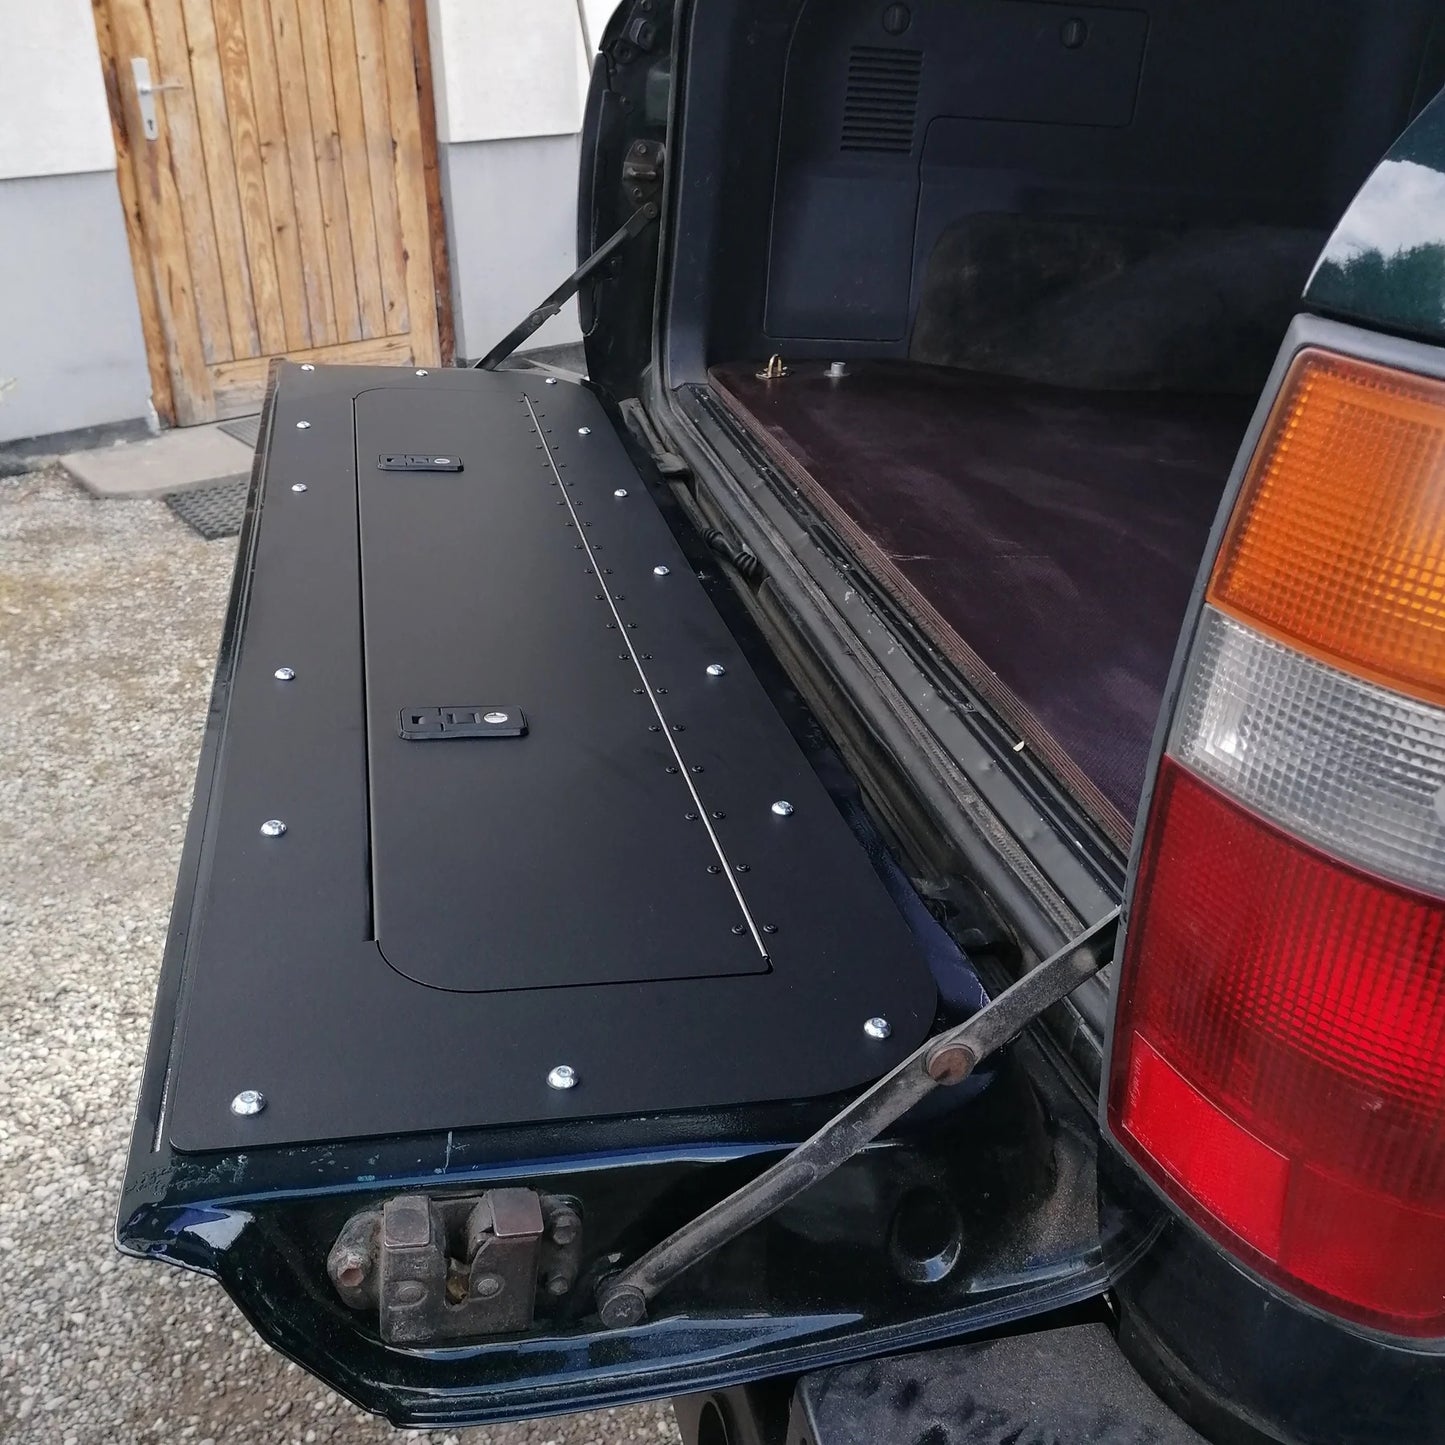 Tailgate Storage Mod - Suitable for use with 80 Series LandCruiser